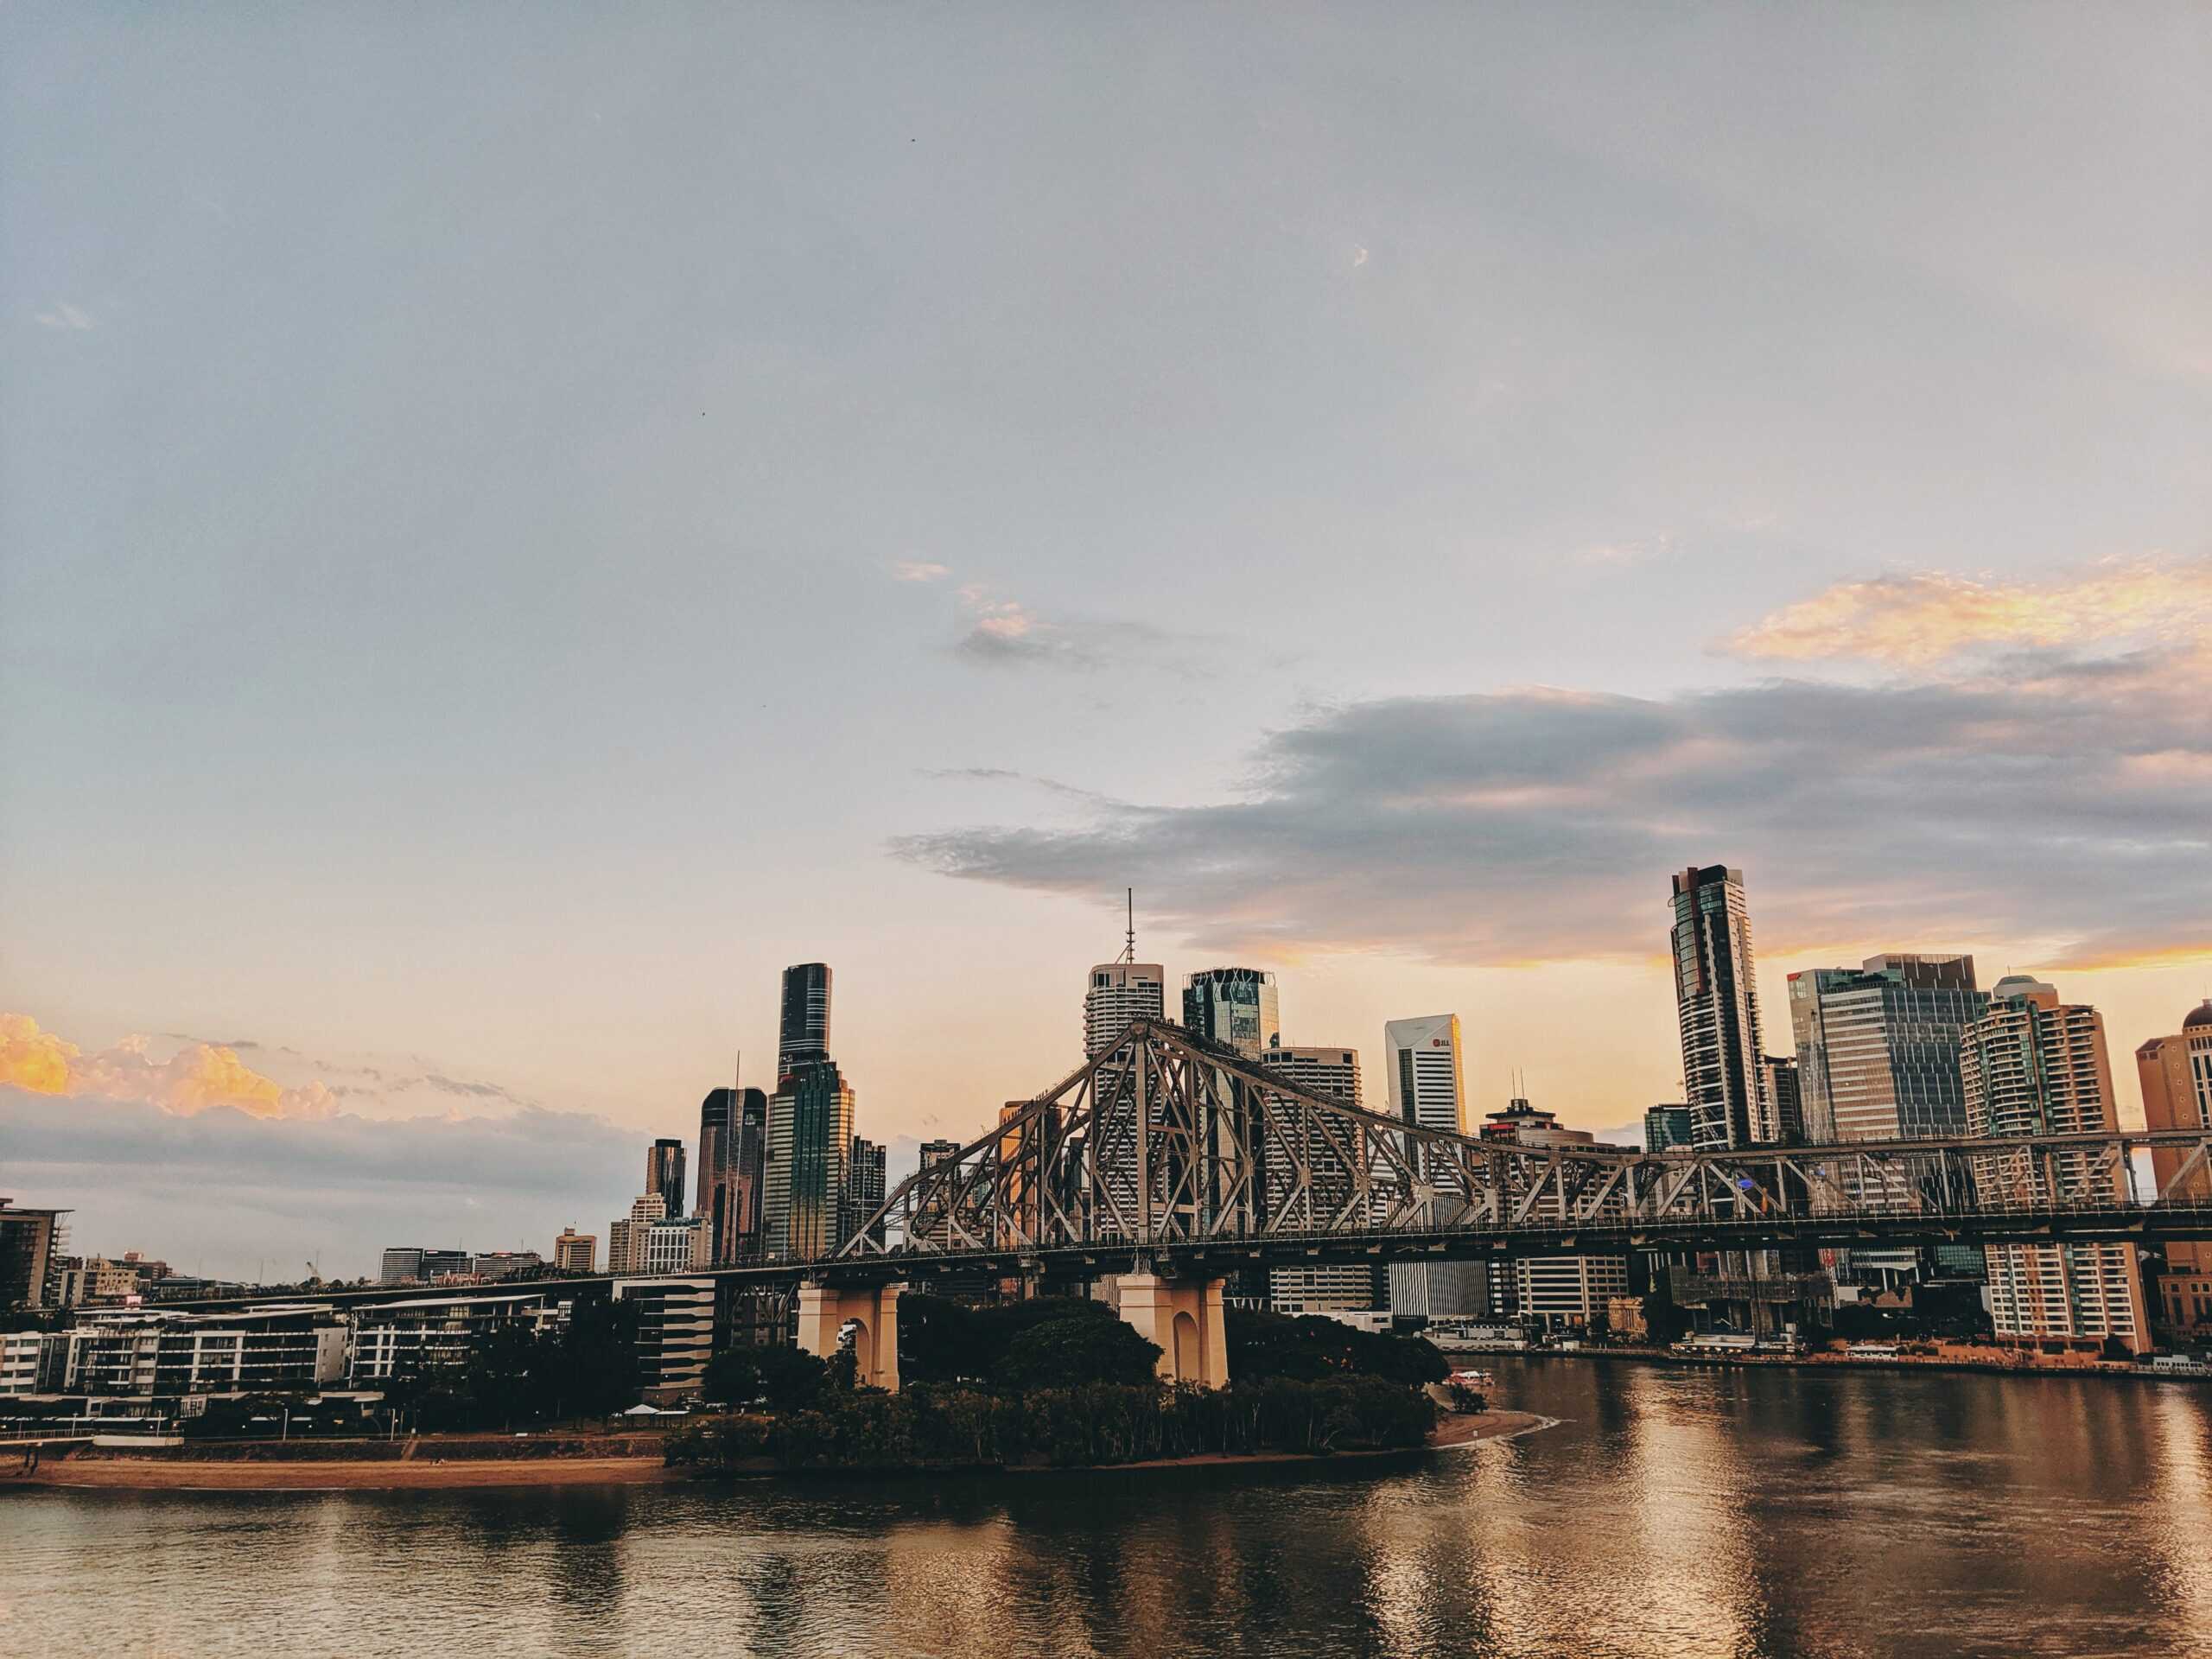 <p>Brisbane, with its riverside parks, cultural events, and subtropical climate, appeals to retirees seeking an urban Australian experience. Explore museums, attend festivals, and enjoy outdoor activities.</p>